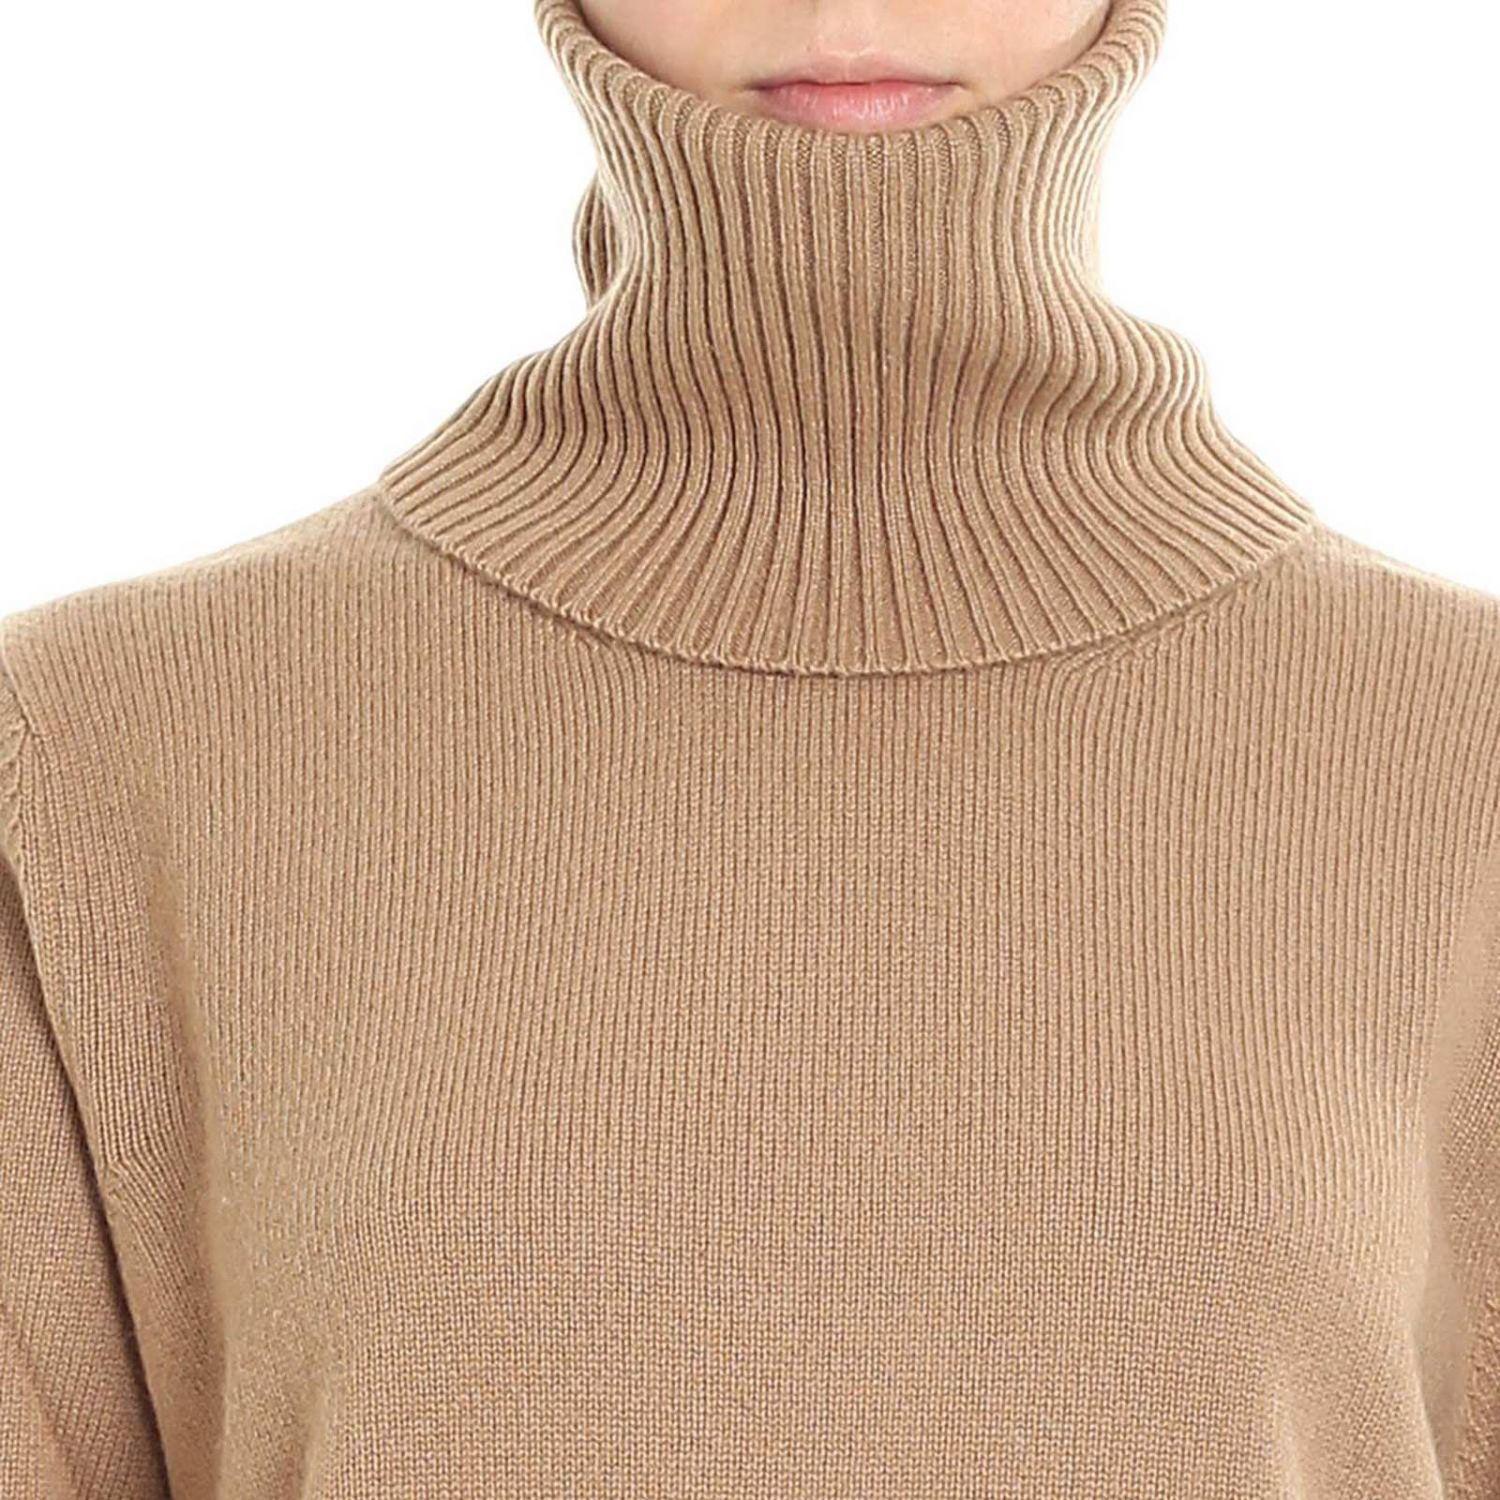 DSquared² Wool Camel Color Crop Turtleneck Sweater in Natural - Lyst